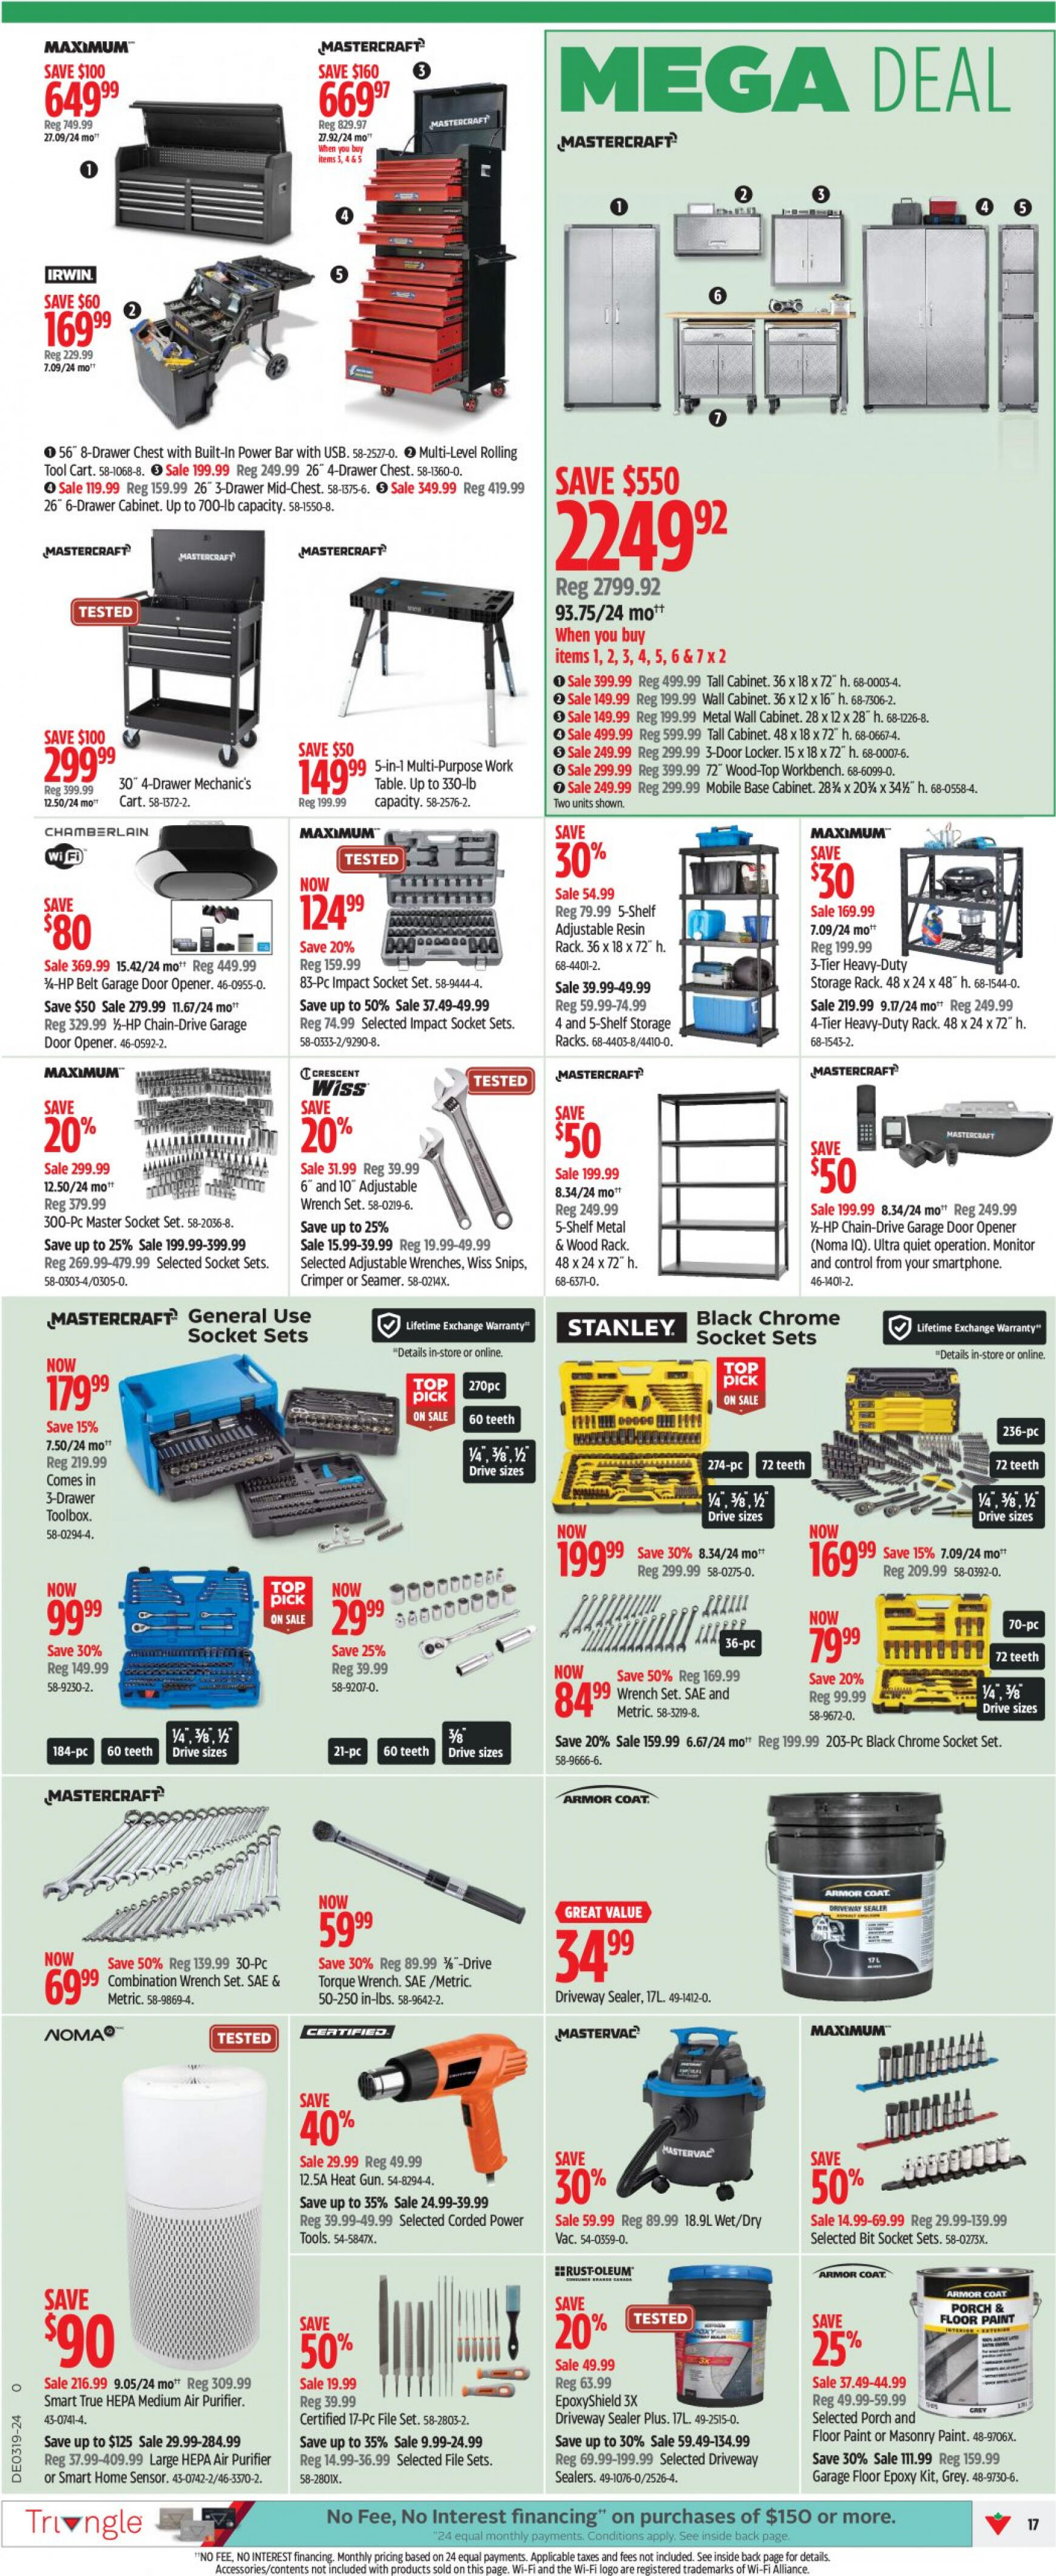 canadian-tire - Canadian Tire flyer current 02.05. - 08.05. - page: 16